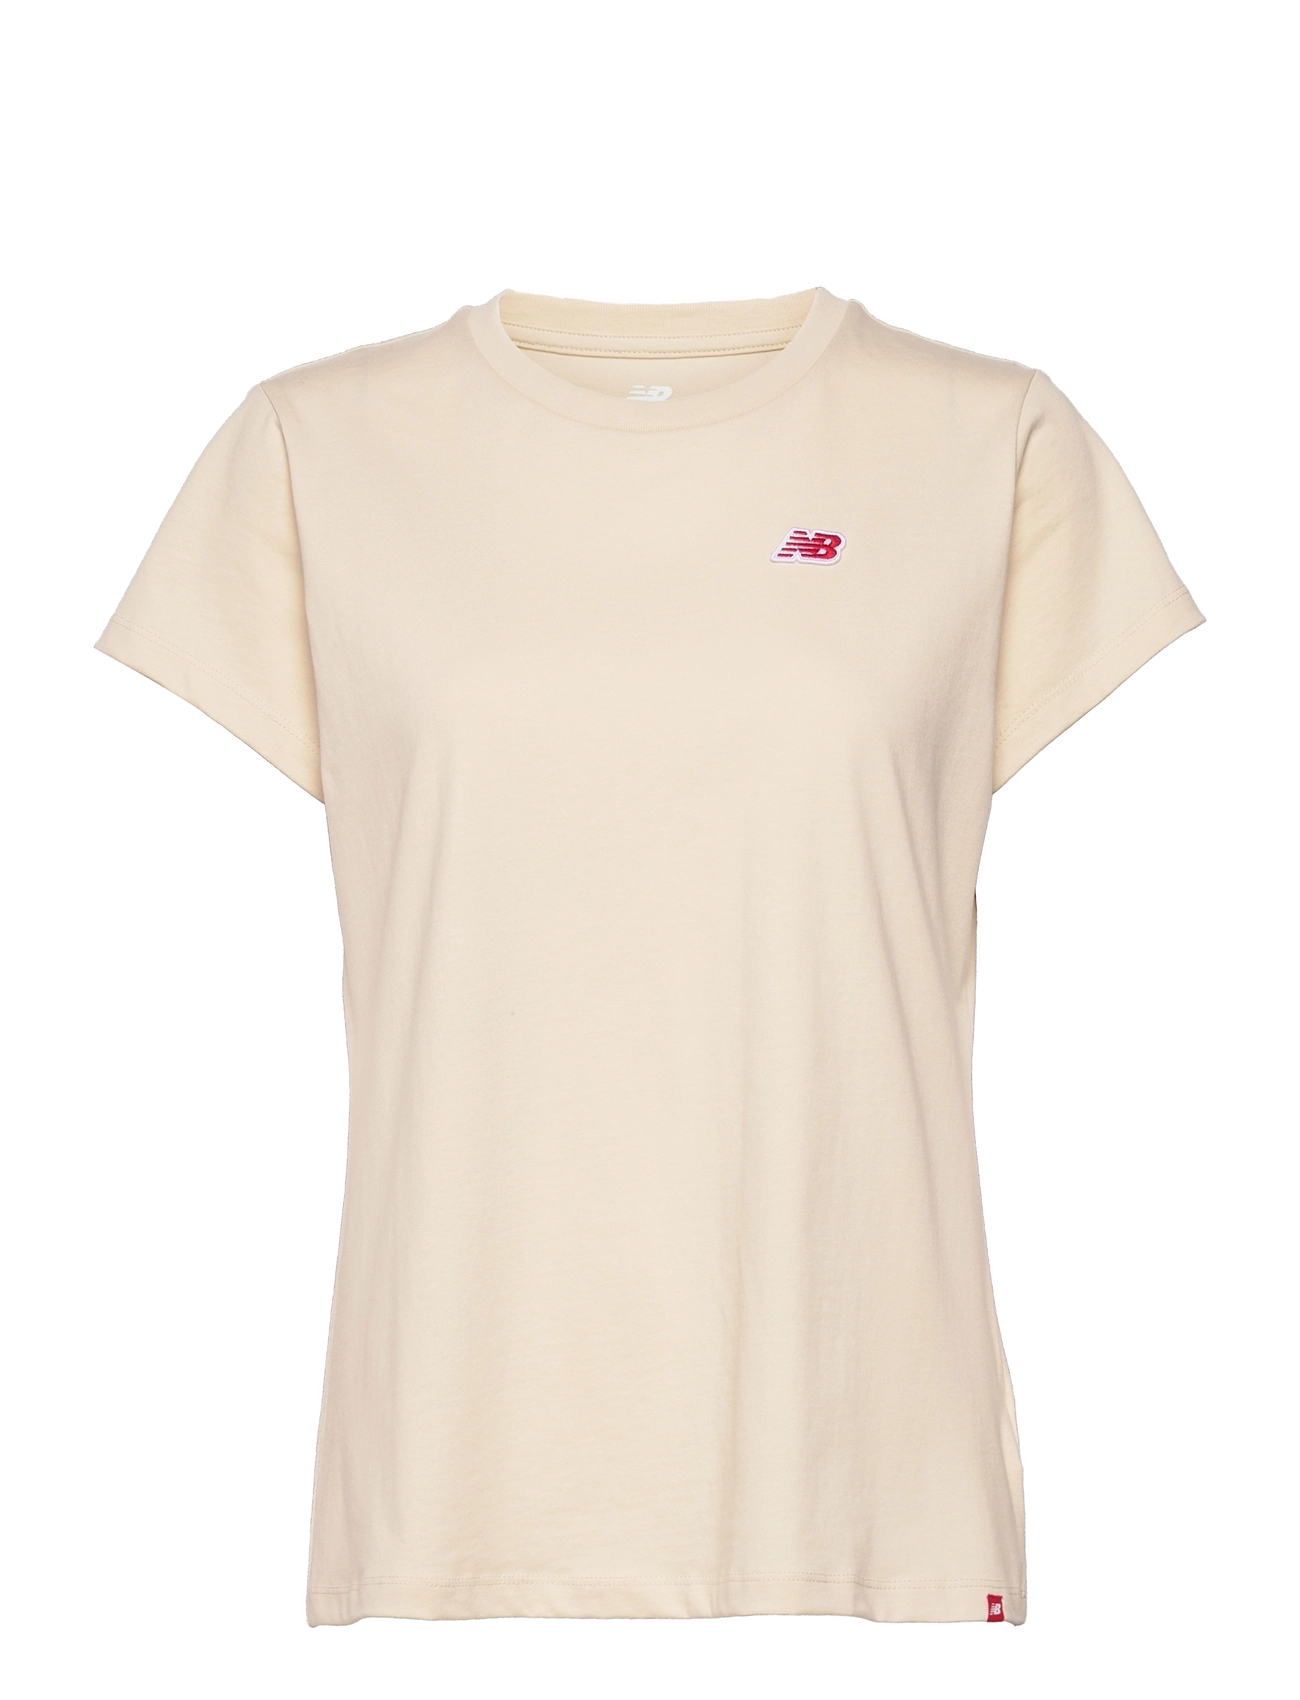 Nb Essentials Small Nb Pack Tee T-shirts & Tops Short-sleeved Creme New Balance